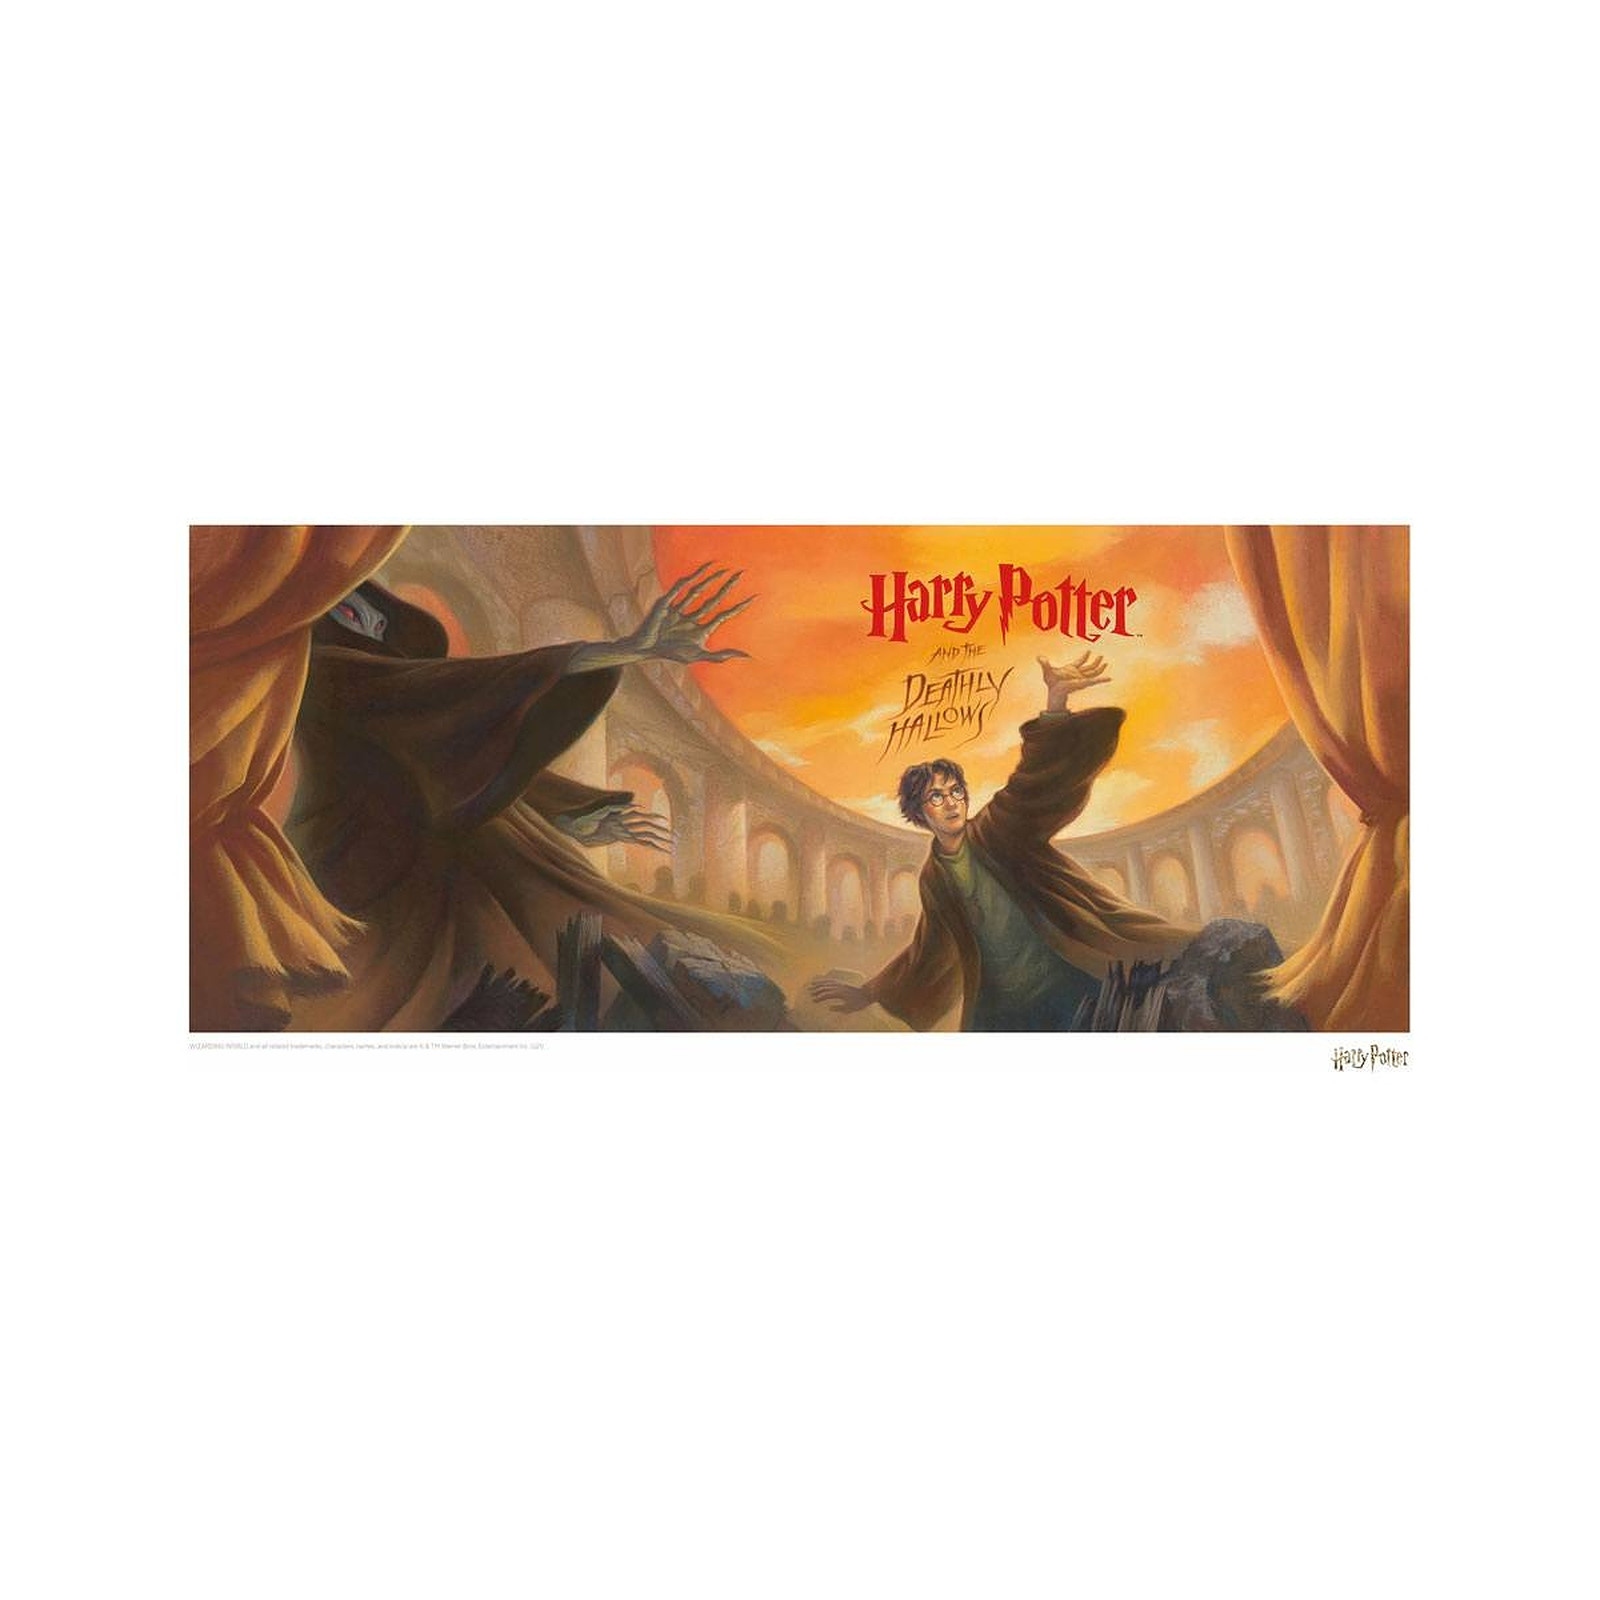 Harry Potter - Lithographie Deathly Hallows Book Cover Artwork Limited Edition 42 x 30 cm - Posters Fanattik